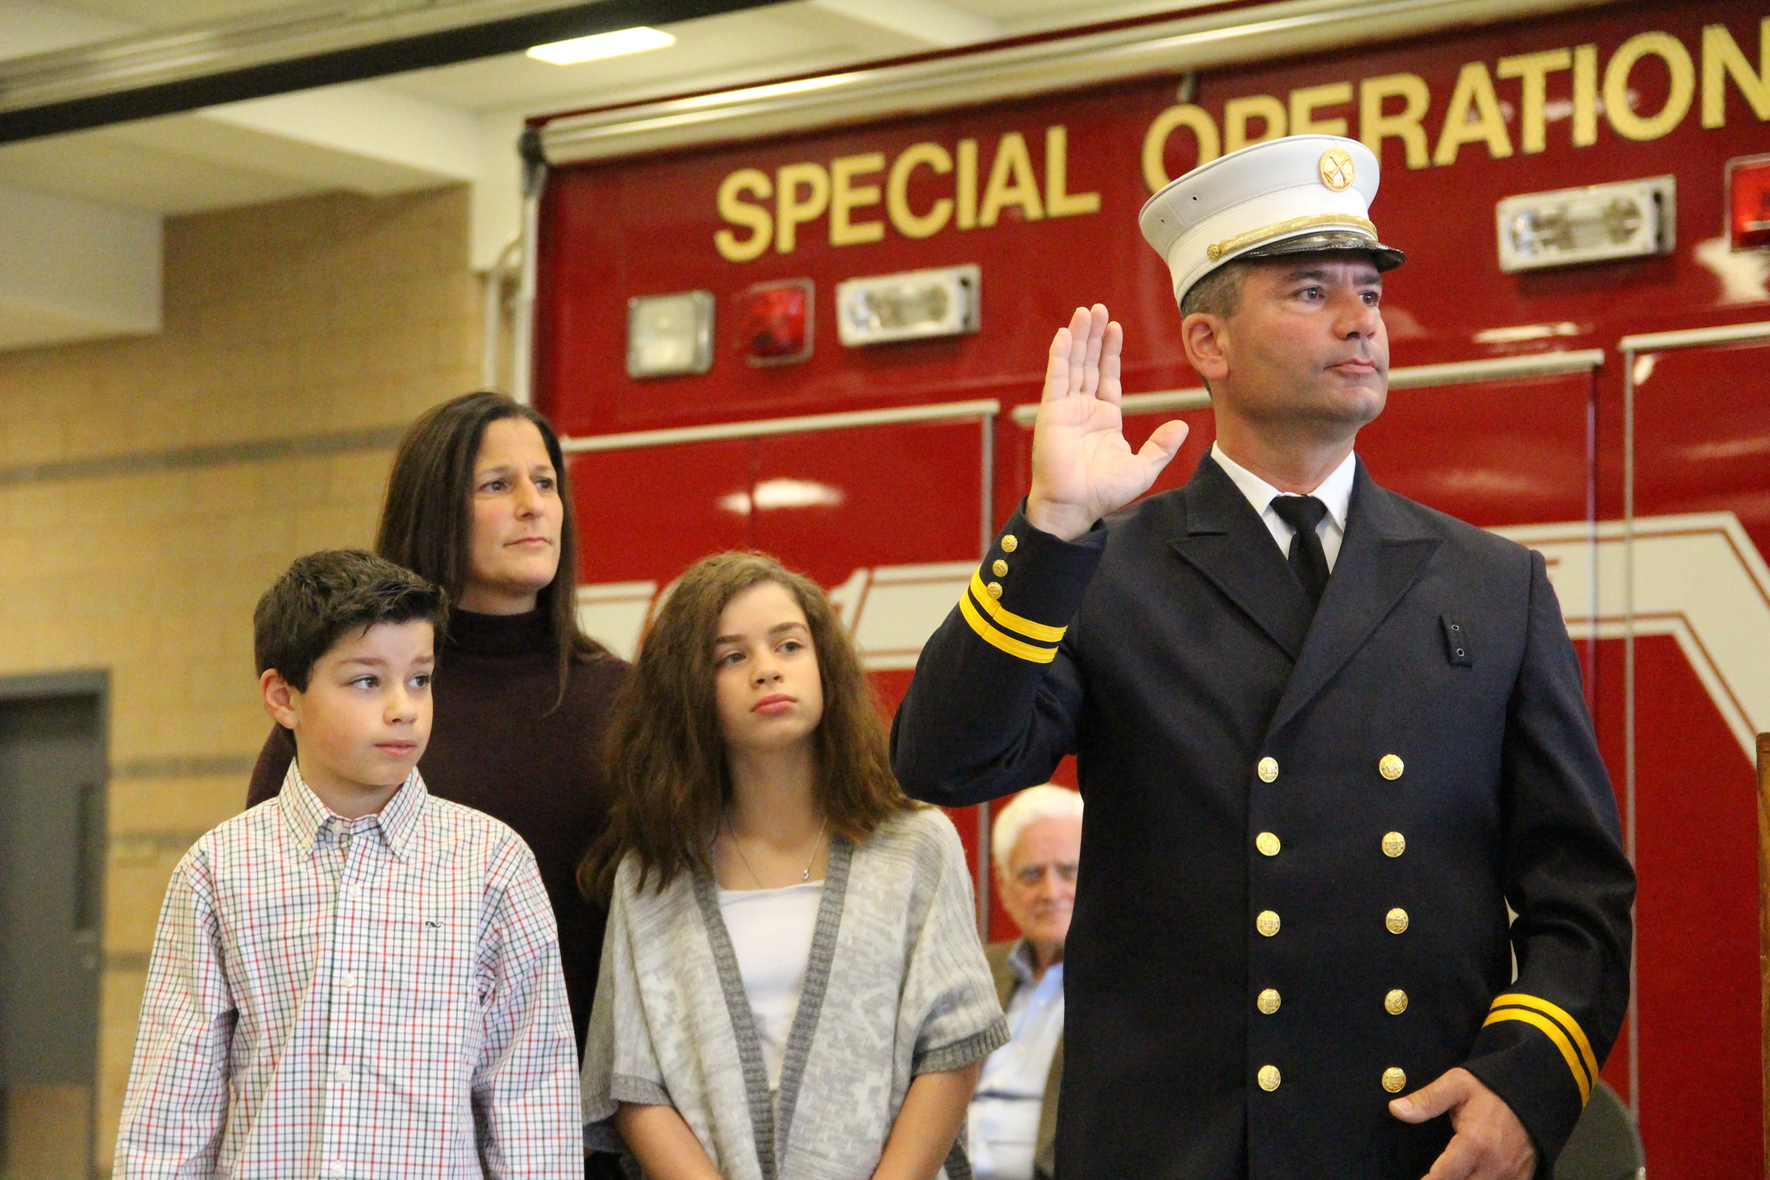 Chris Pratico was sworn in by first selectman Peter Tesei on Tuesday. He was promoted from Deputy Fire Marshal to Fire Marshal. Dec 12, 2017 Photo: Leslie Yager